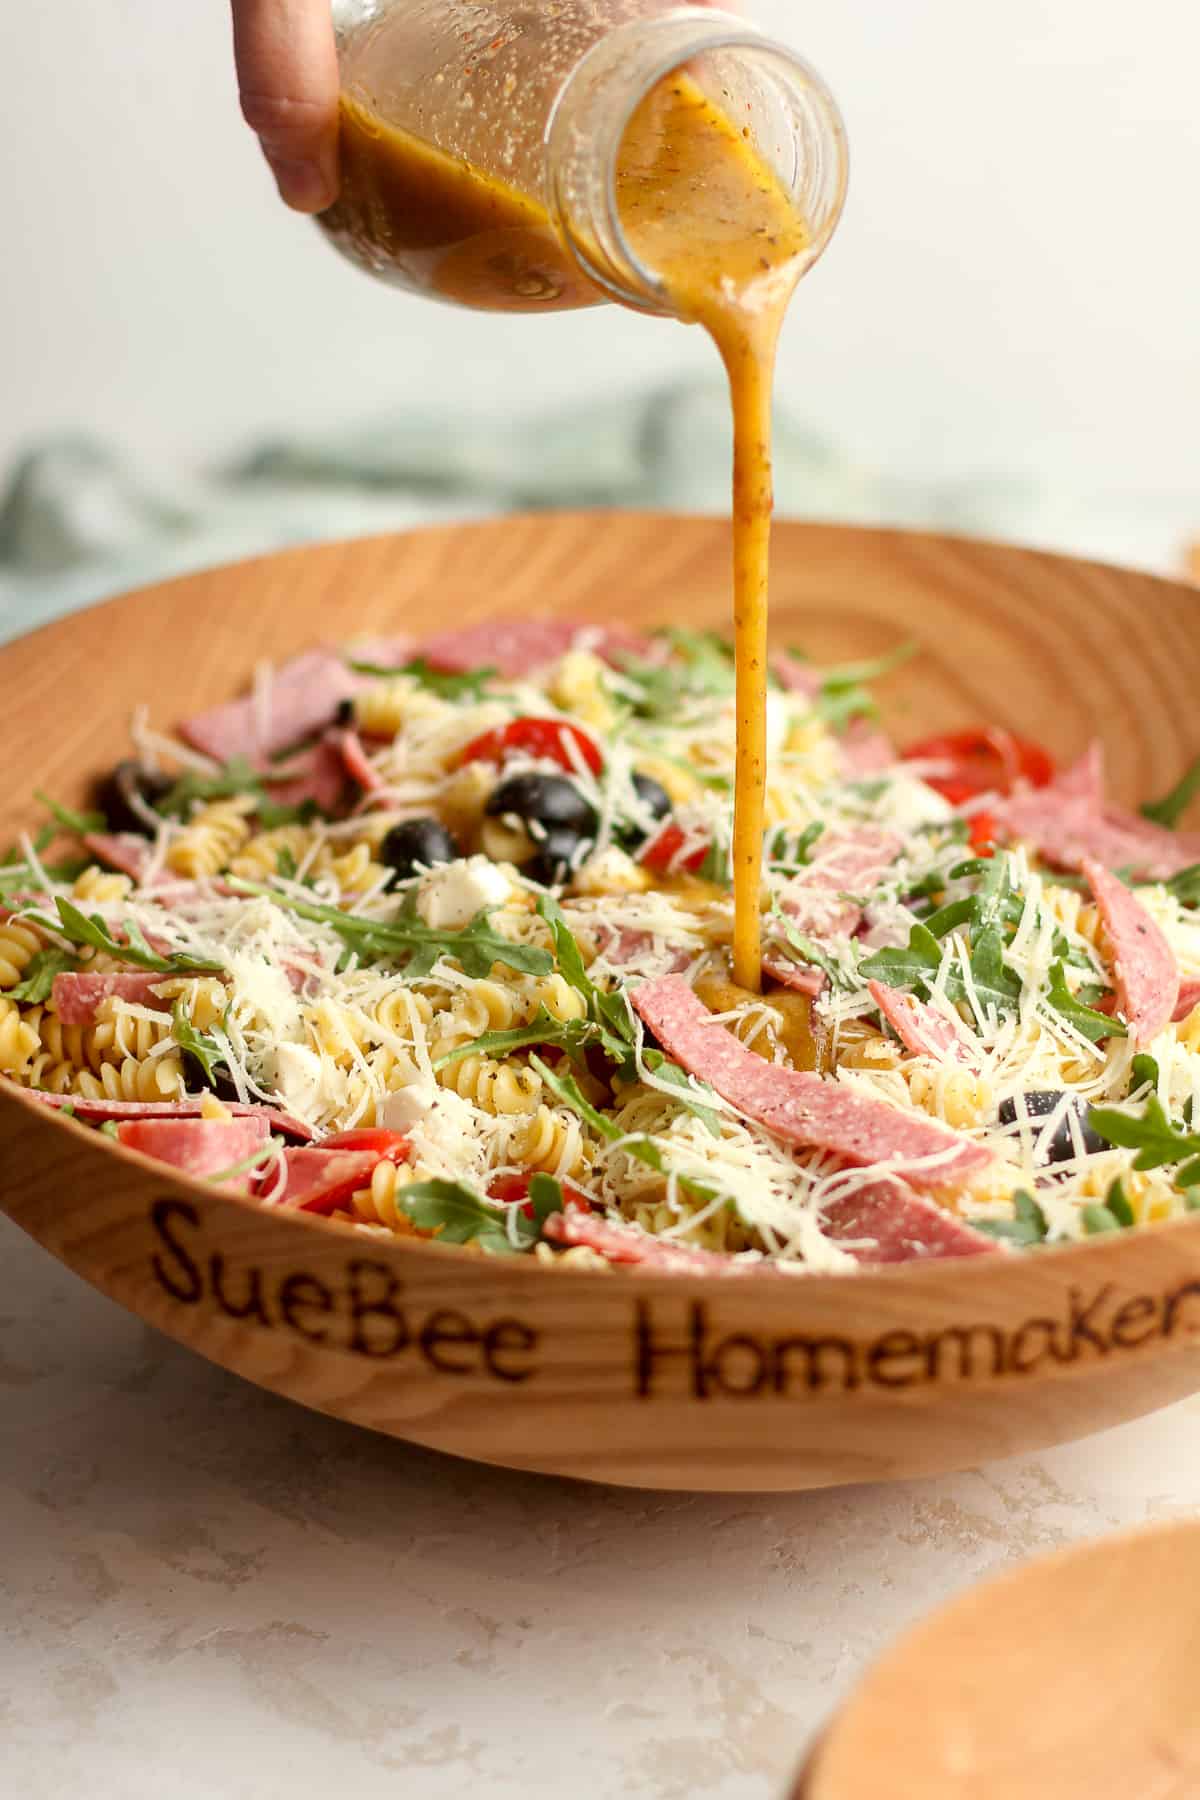 Side view of a bowl of the pasta salad with a hand pouring the creamy Italian dressing over the top.